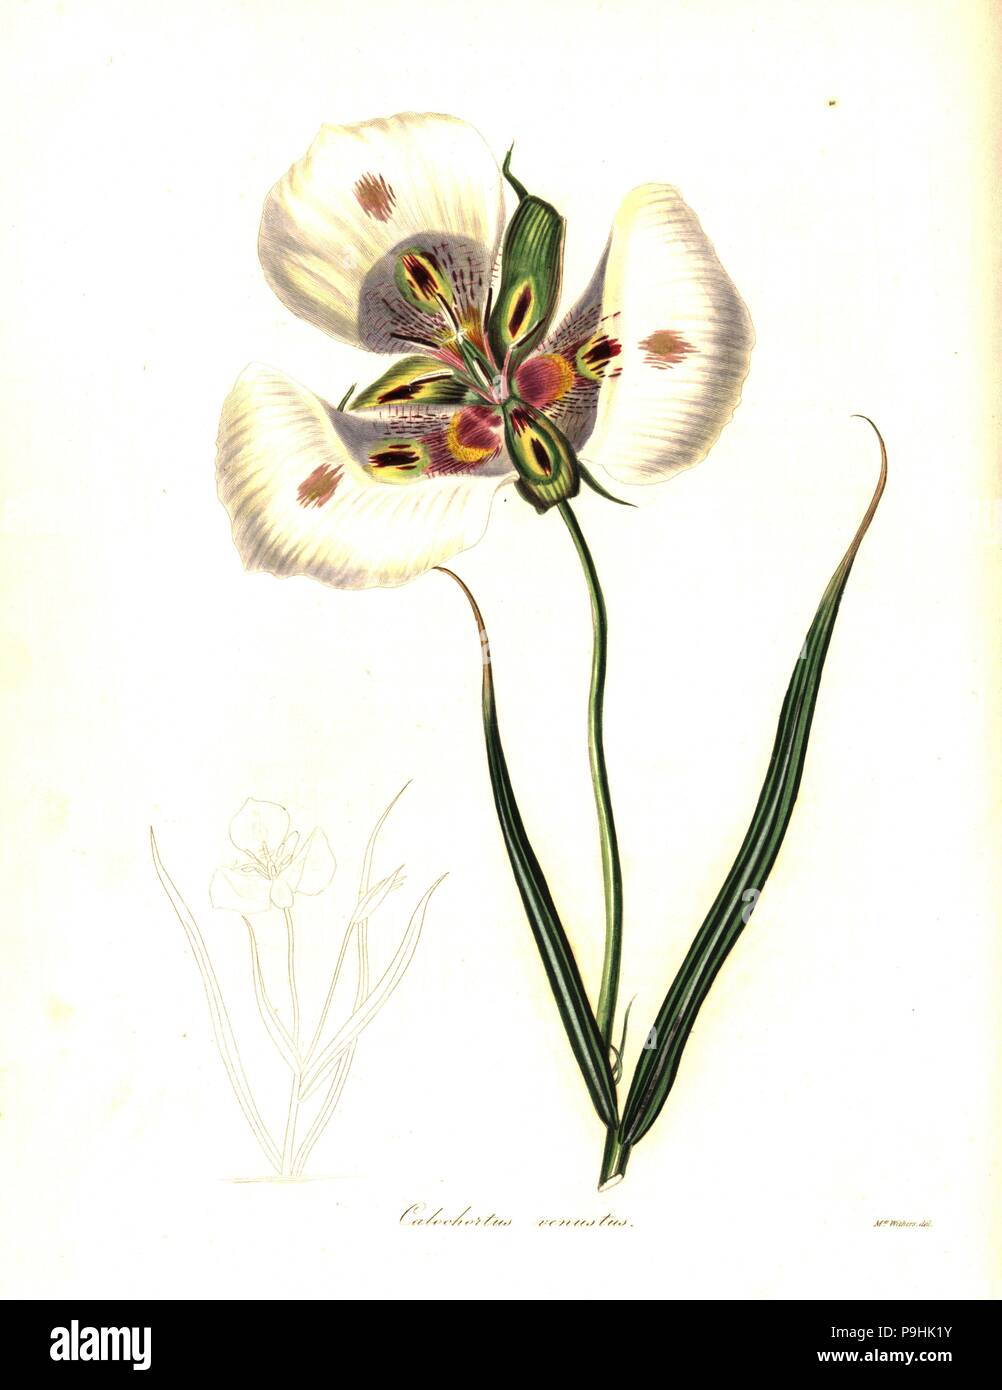 Butterfly mariposa lily or craceful calochortus, Calochortus venustus. Handcoloured copperplate engraving after a botanical illustration by Mrs Augusta Withers from Benjamin Maund and the Rev. John Stevens Henslow's The Botanist, London, 1836. Stock Photo